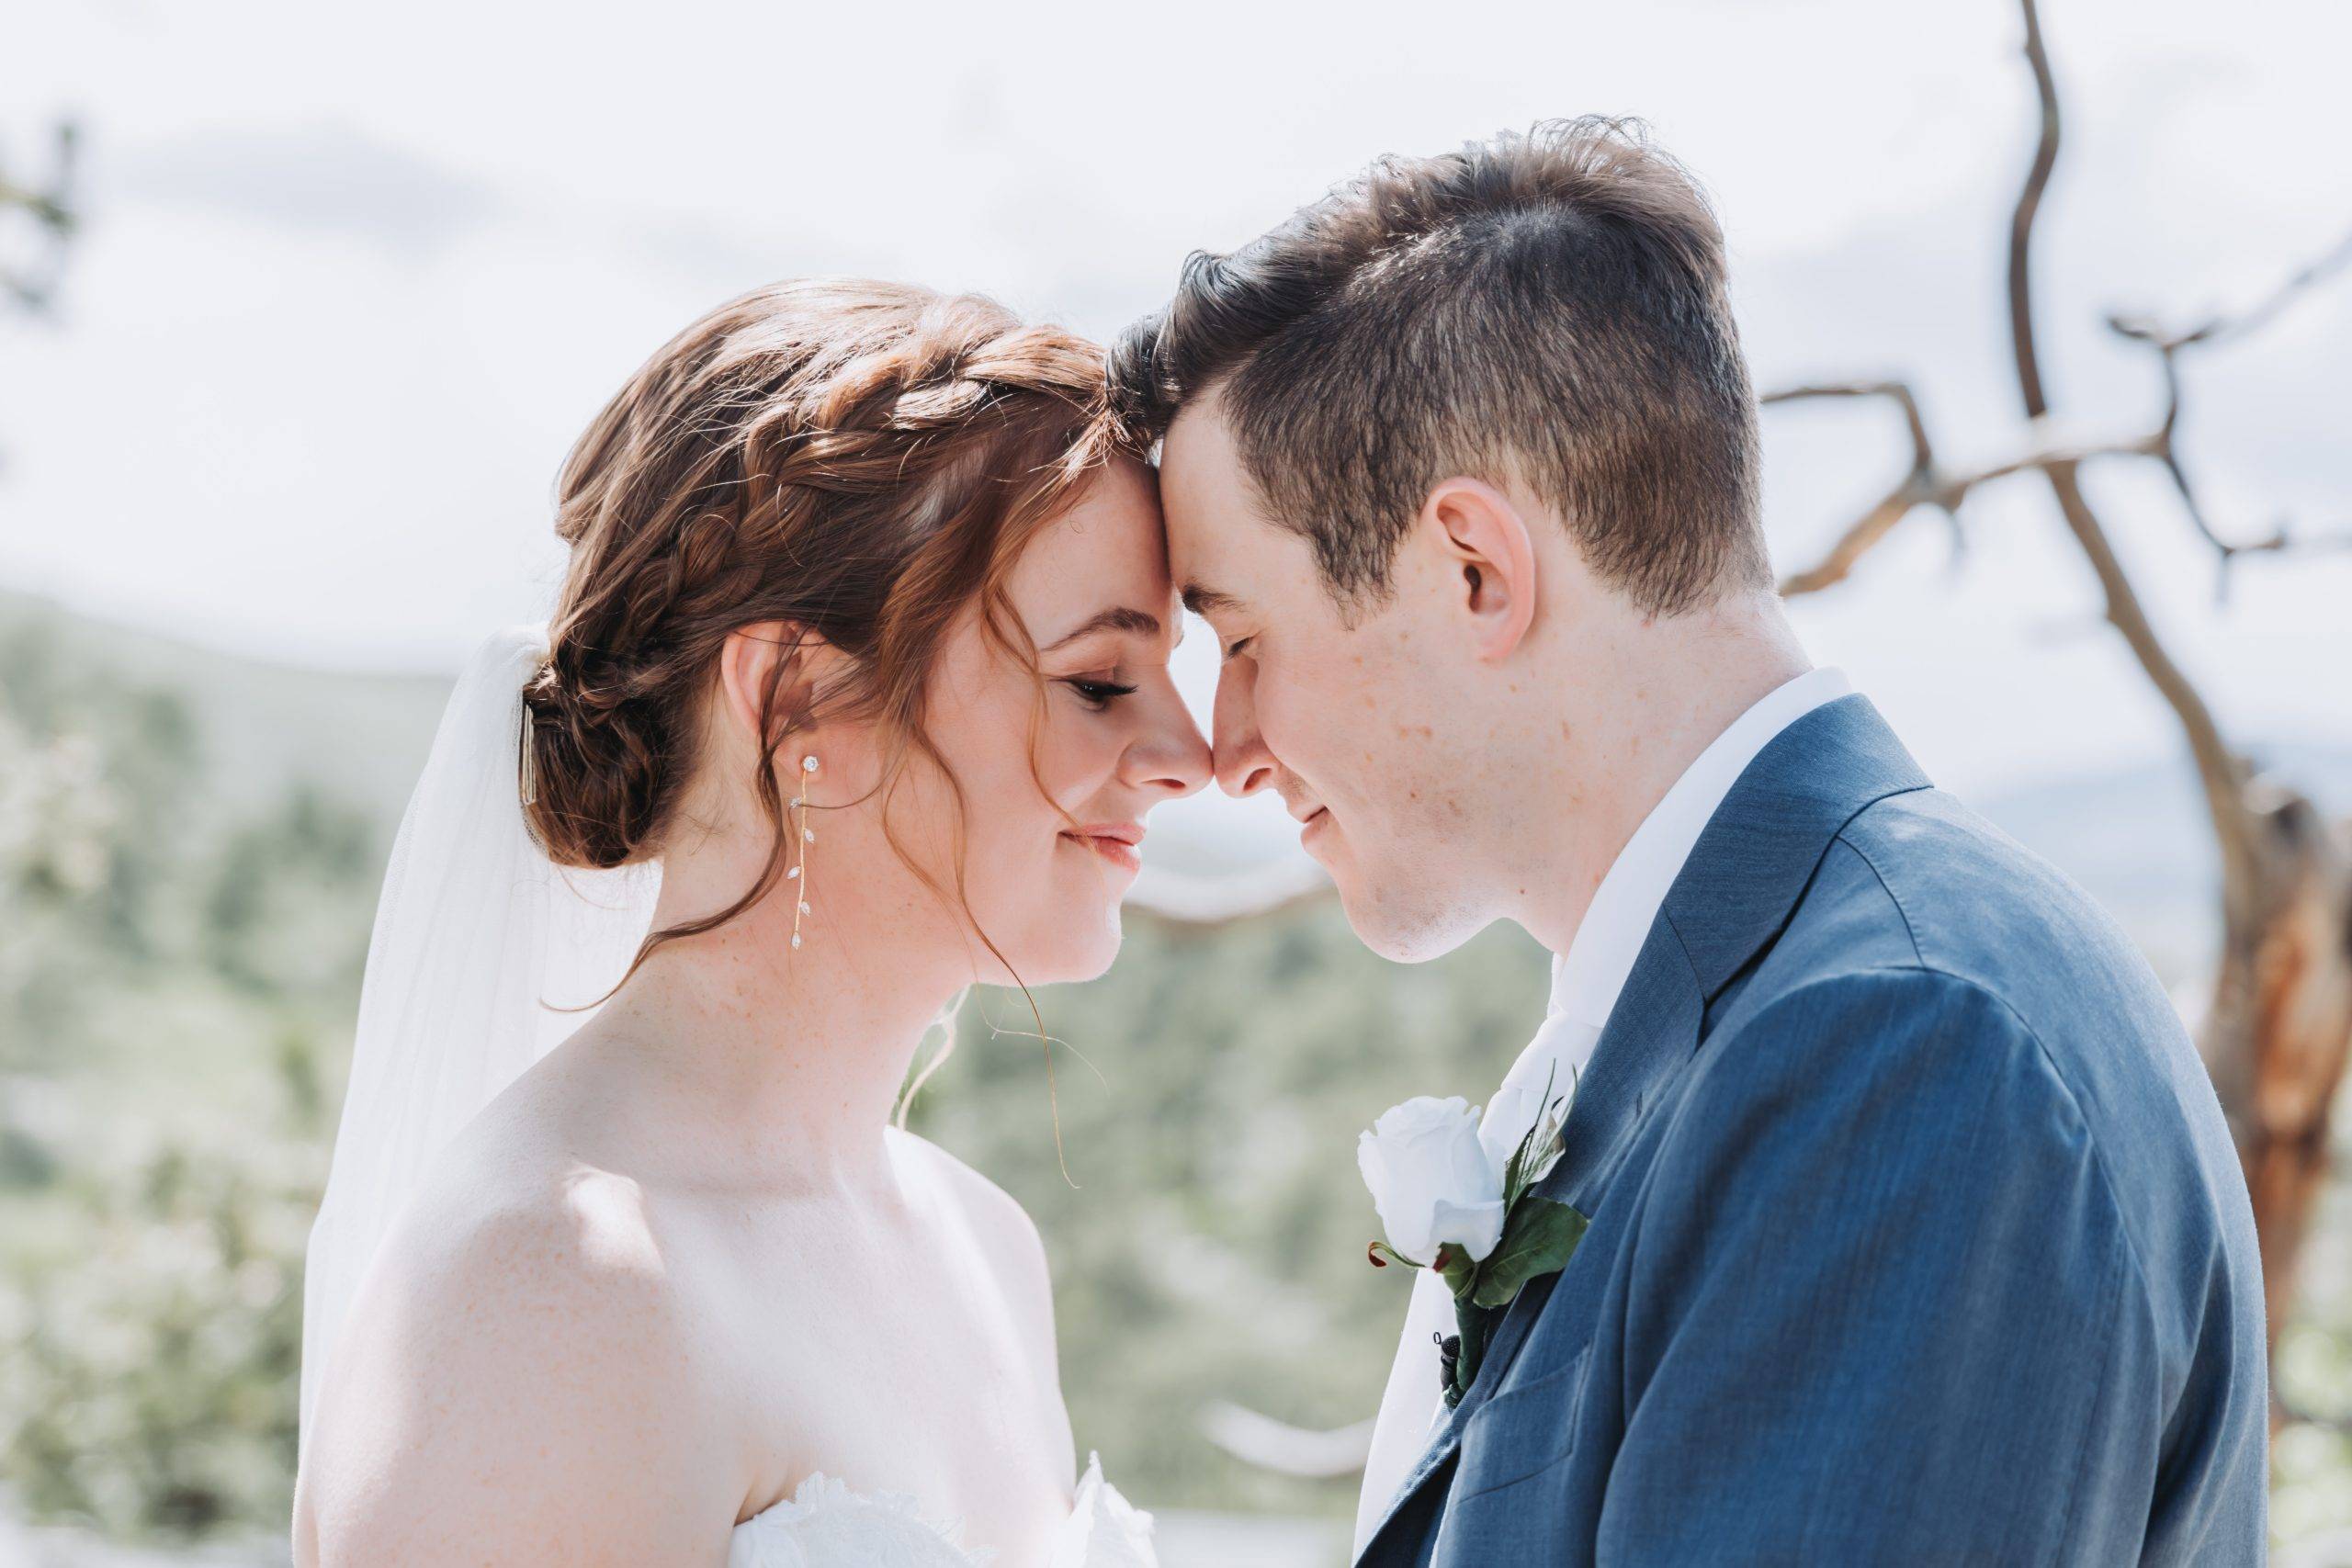 A bride and groom named Jessica and Keith touching foreheads at a Colorado wedding